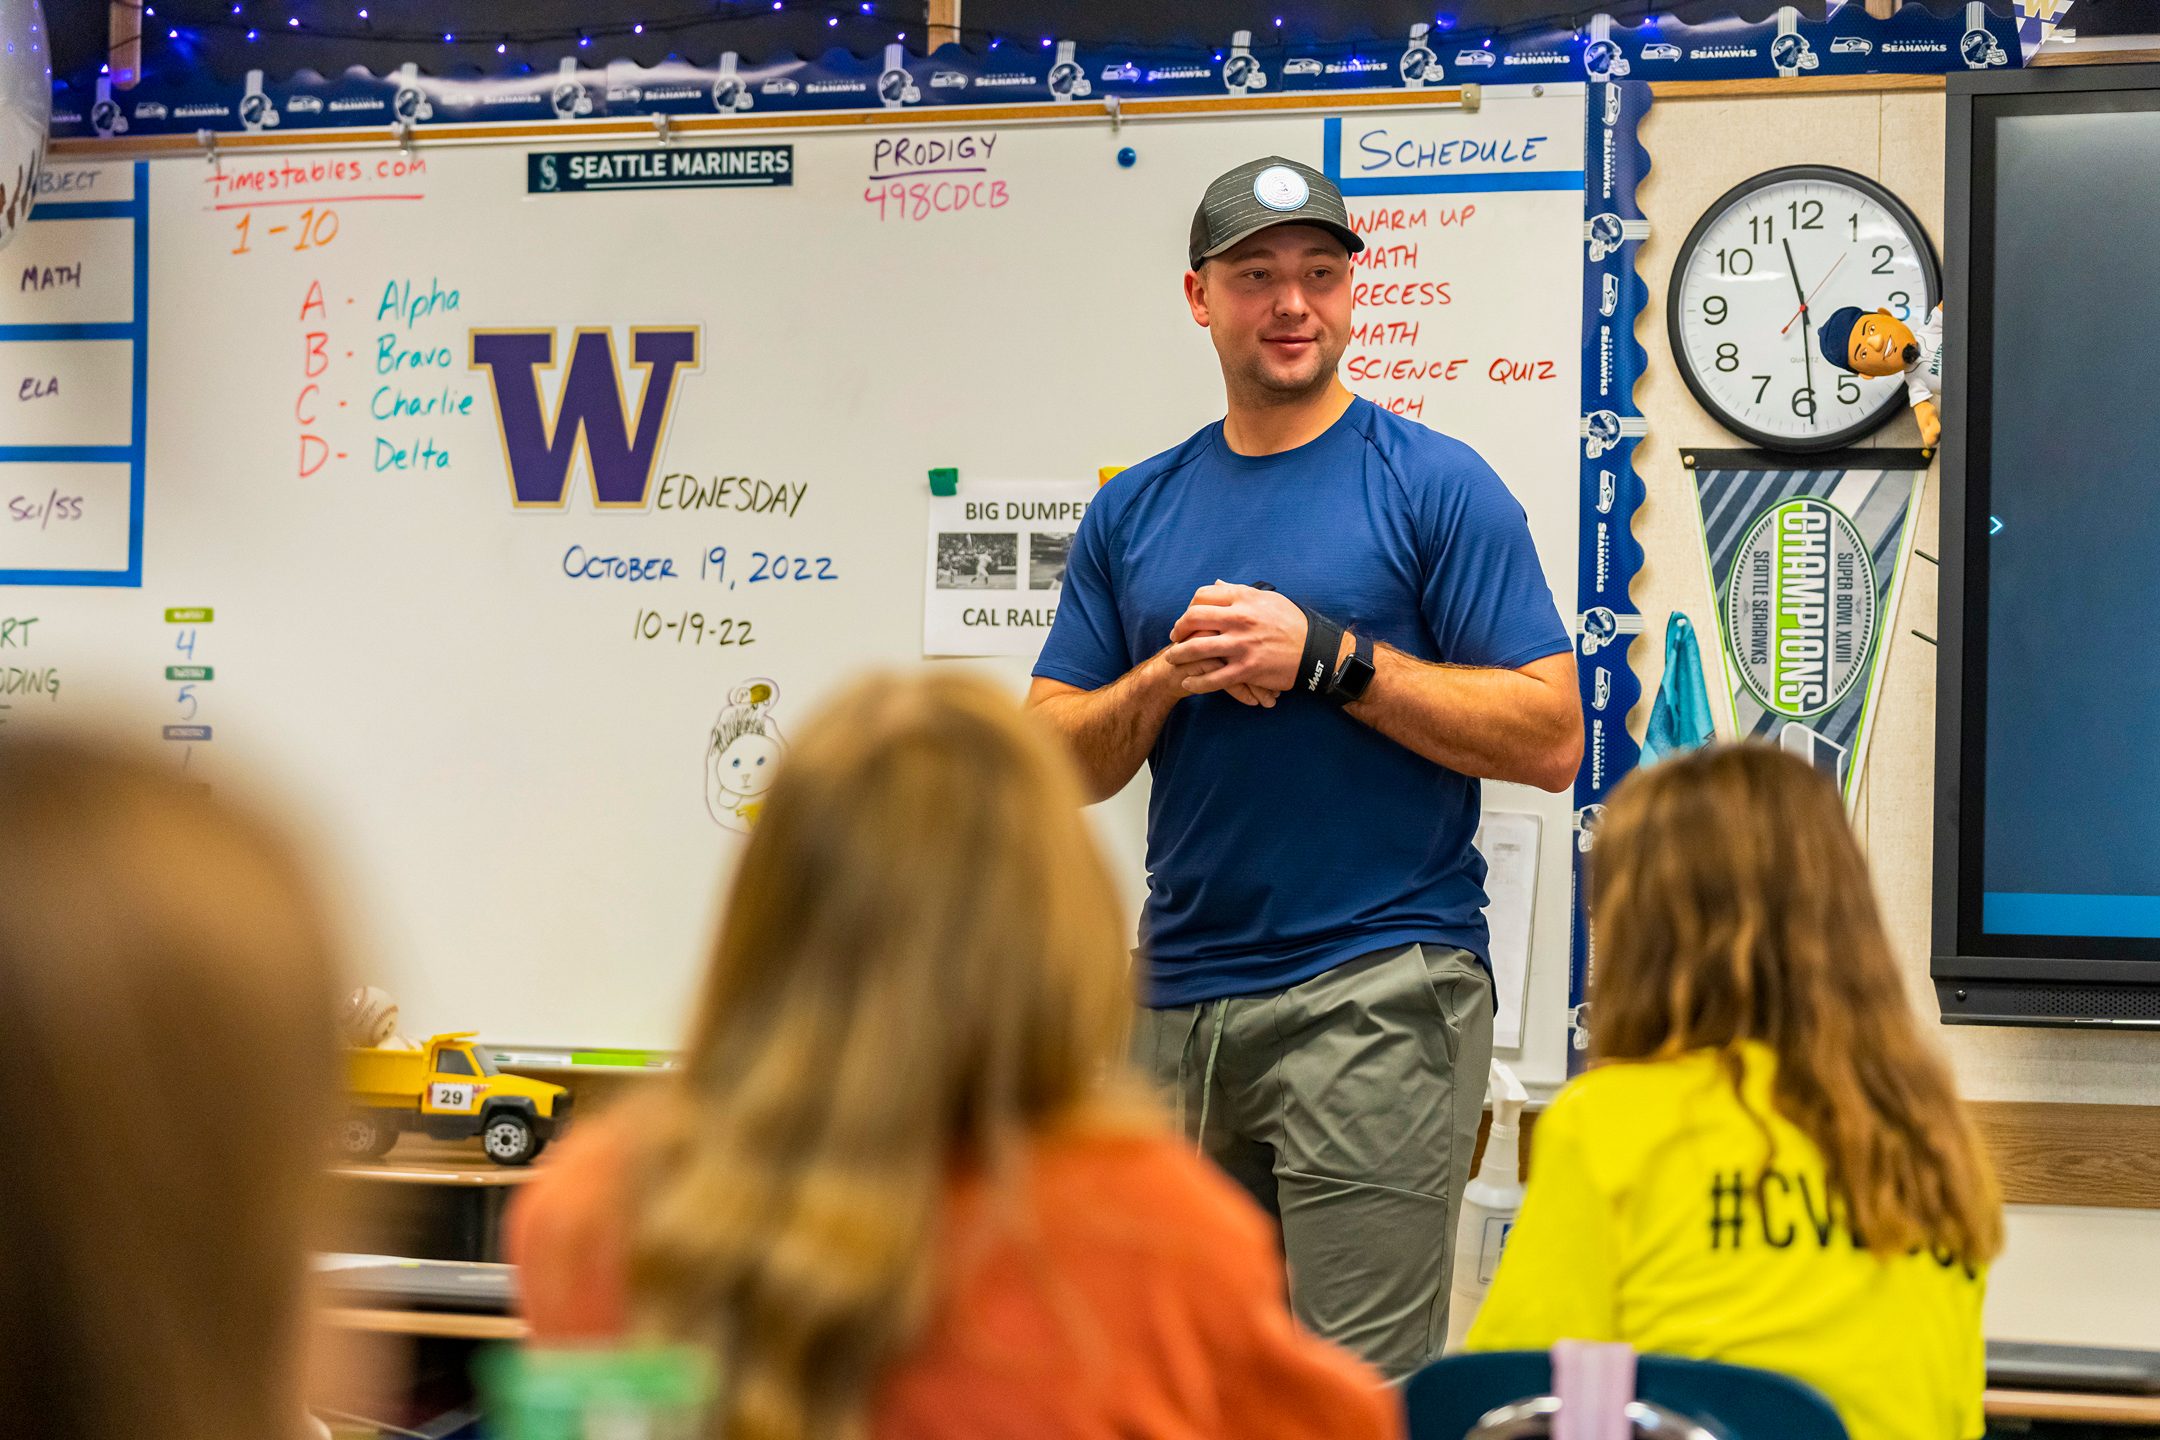 Is that Big Dumper?': Cal Raleigh surprises students of Snoqualmie class  from viral video celebration